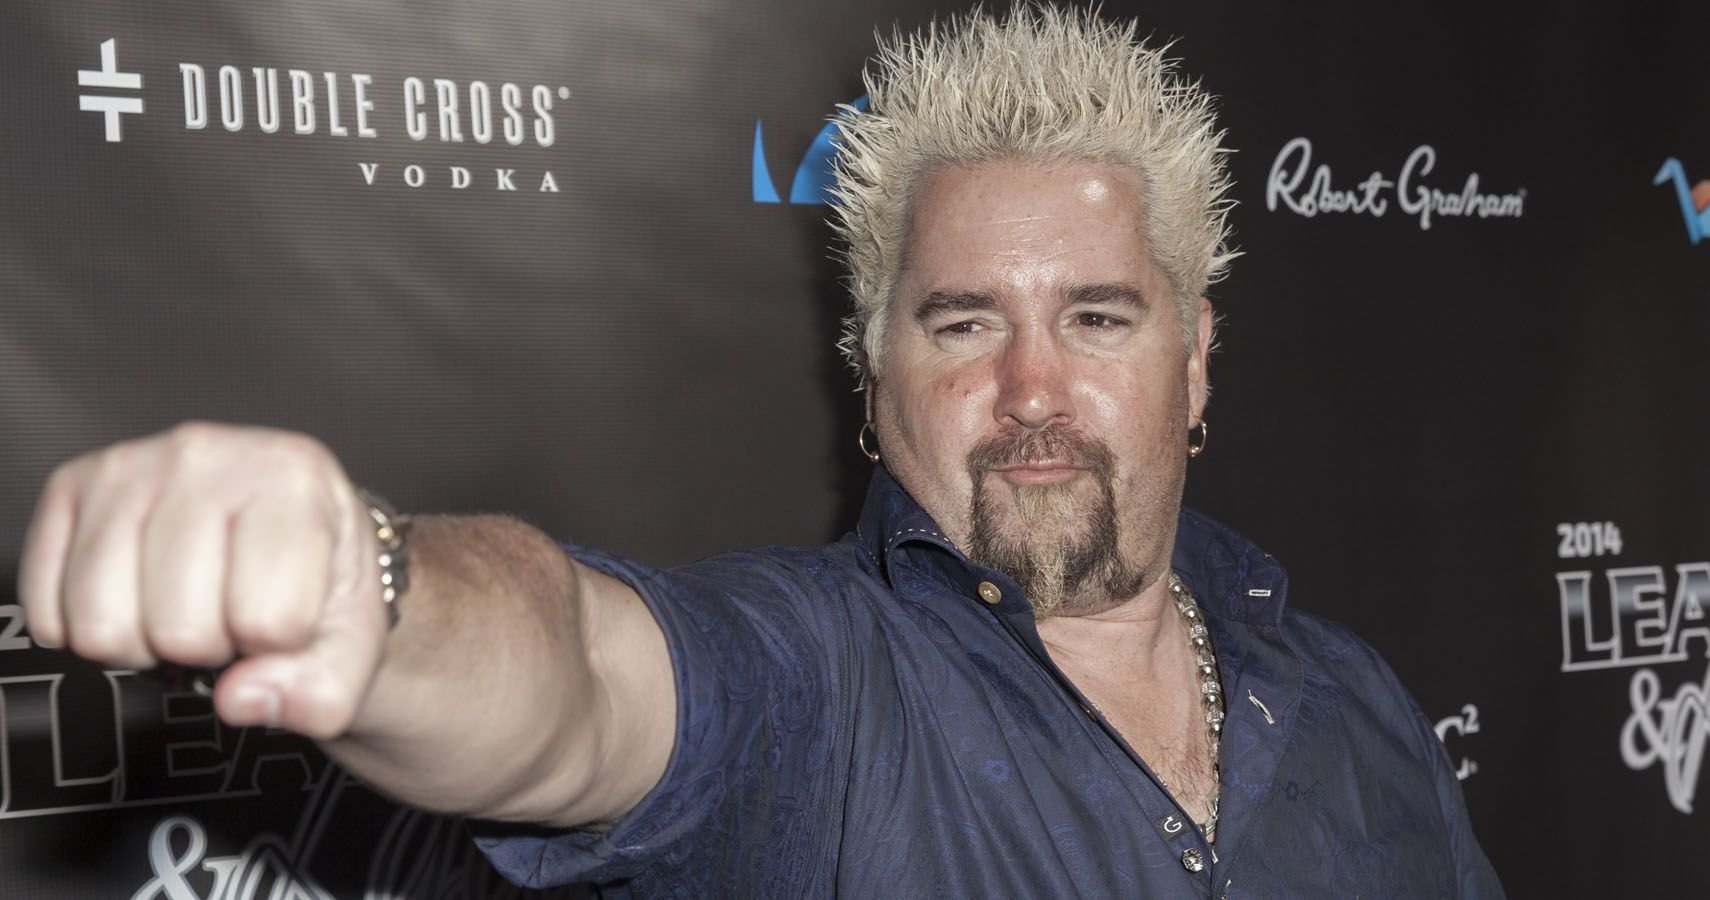 Guy Fieri Buys A Florida Mansion Following Big New Network Deal